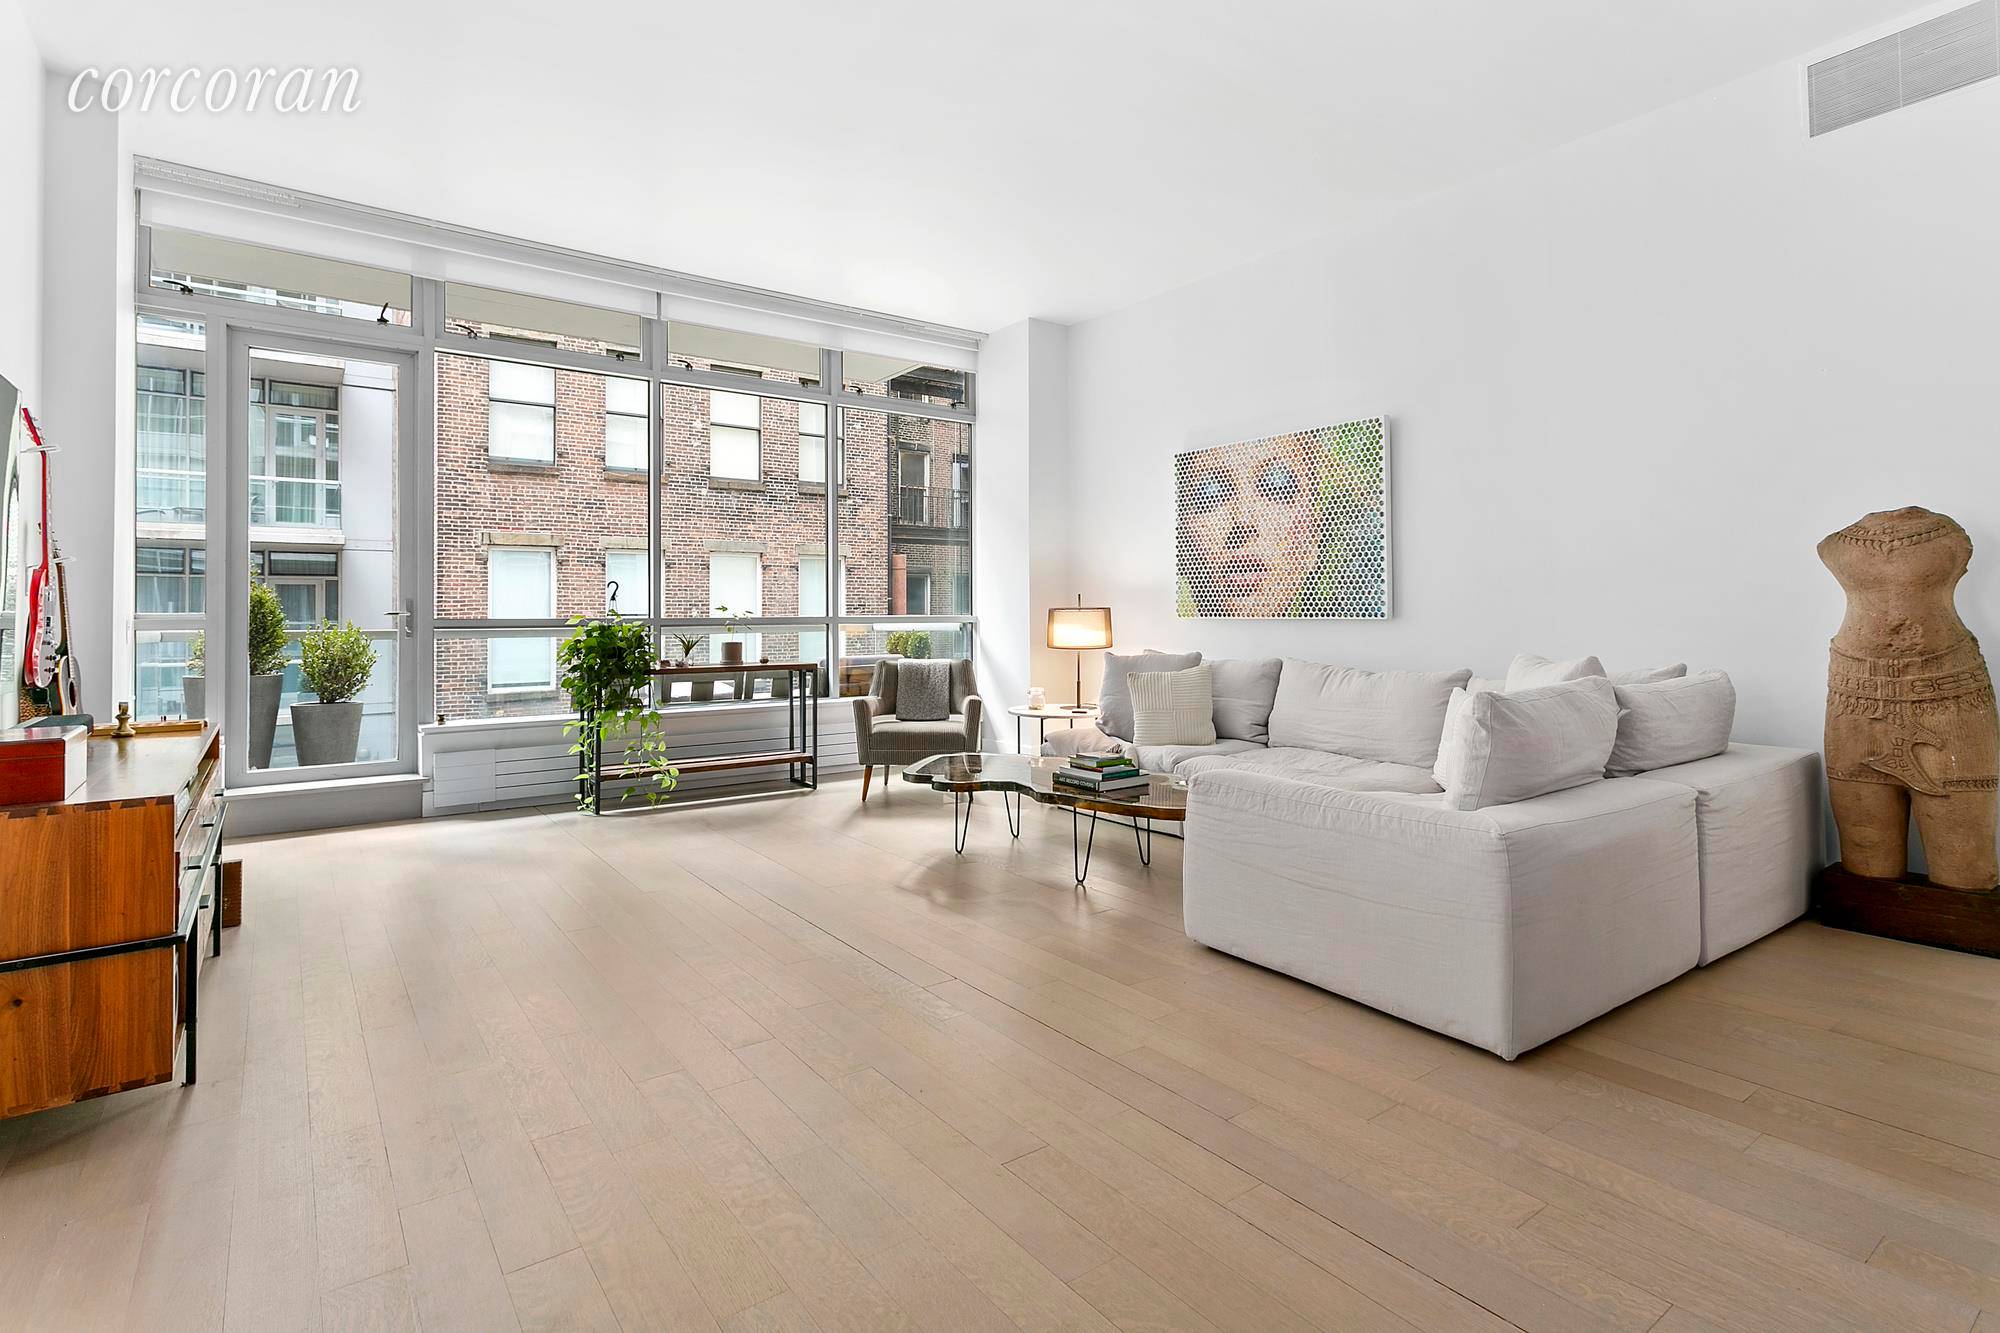 PRICE REDUCED ! Apt 3B at 139 Wooster is a true modern loft with two generous bedrooms in one of SOHO's few full service buildings !